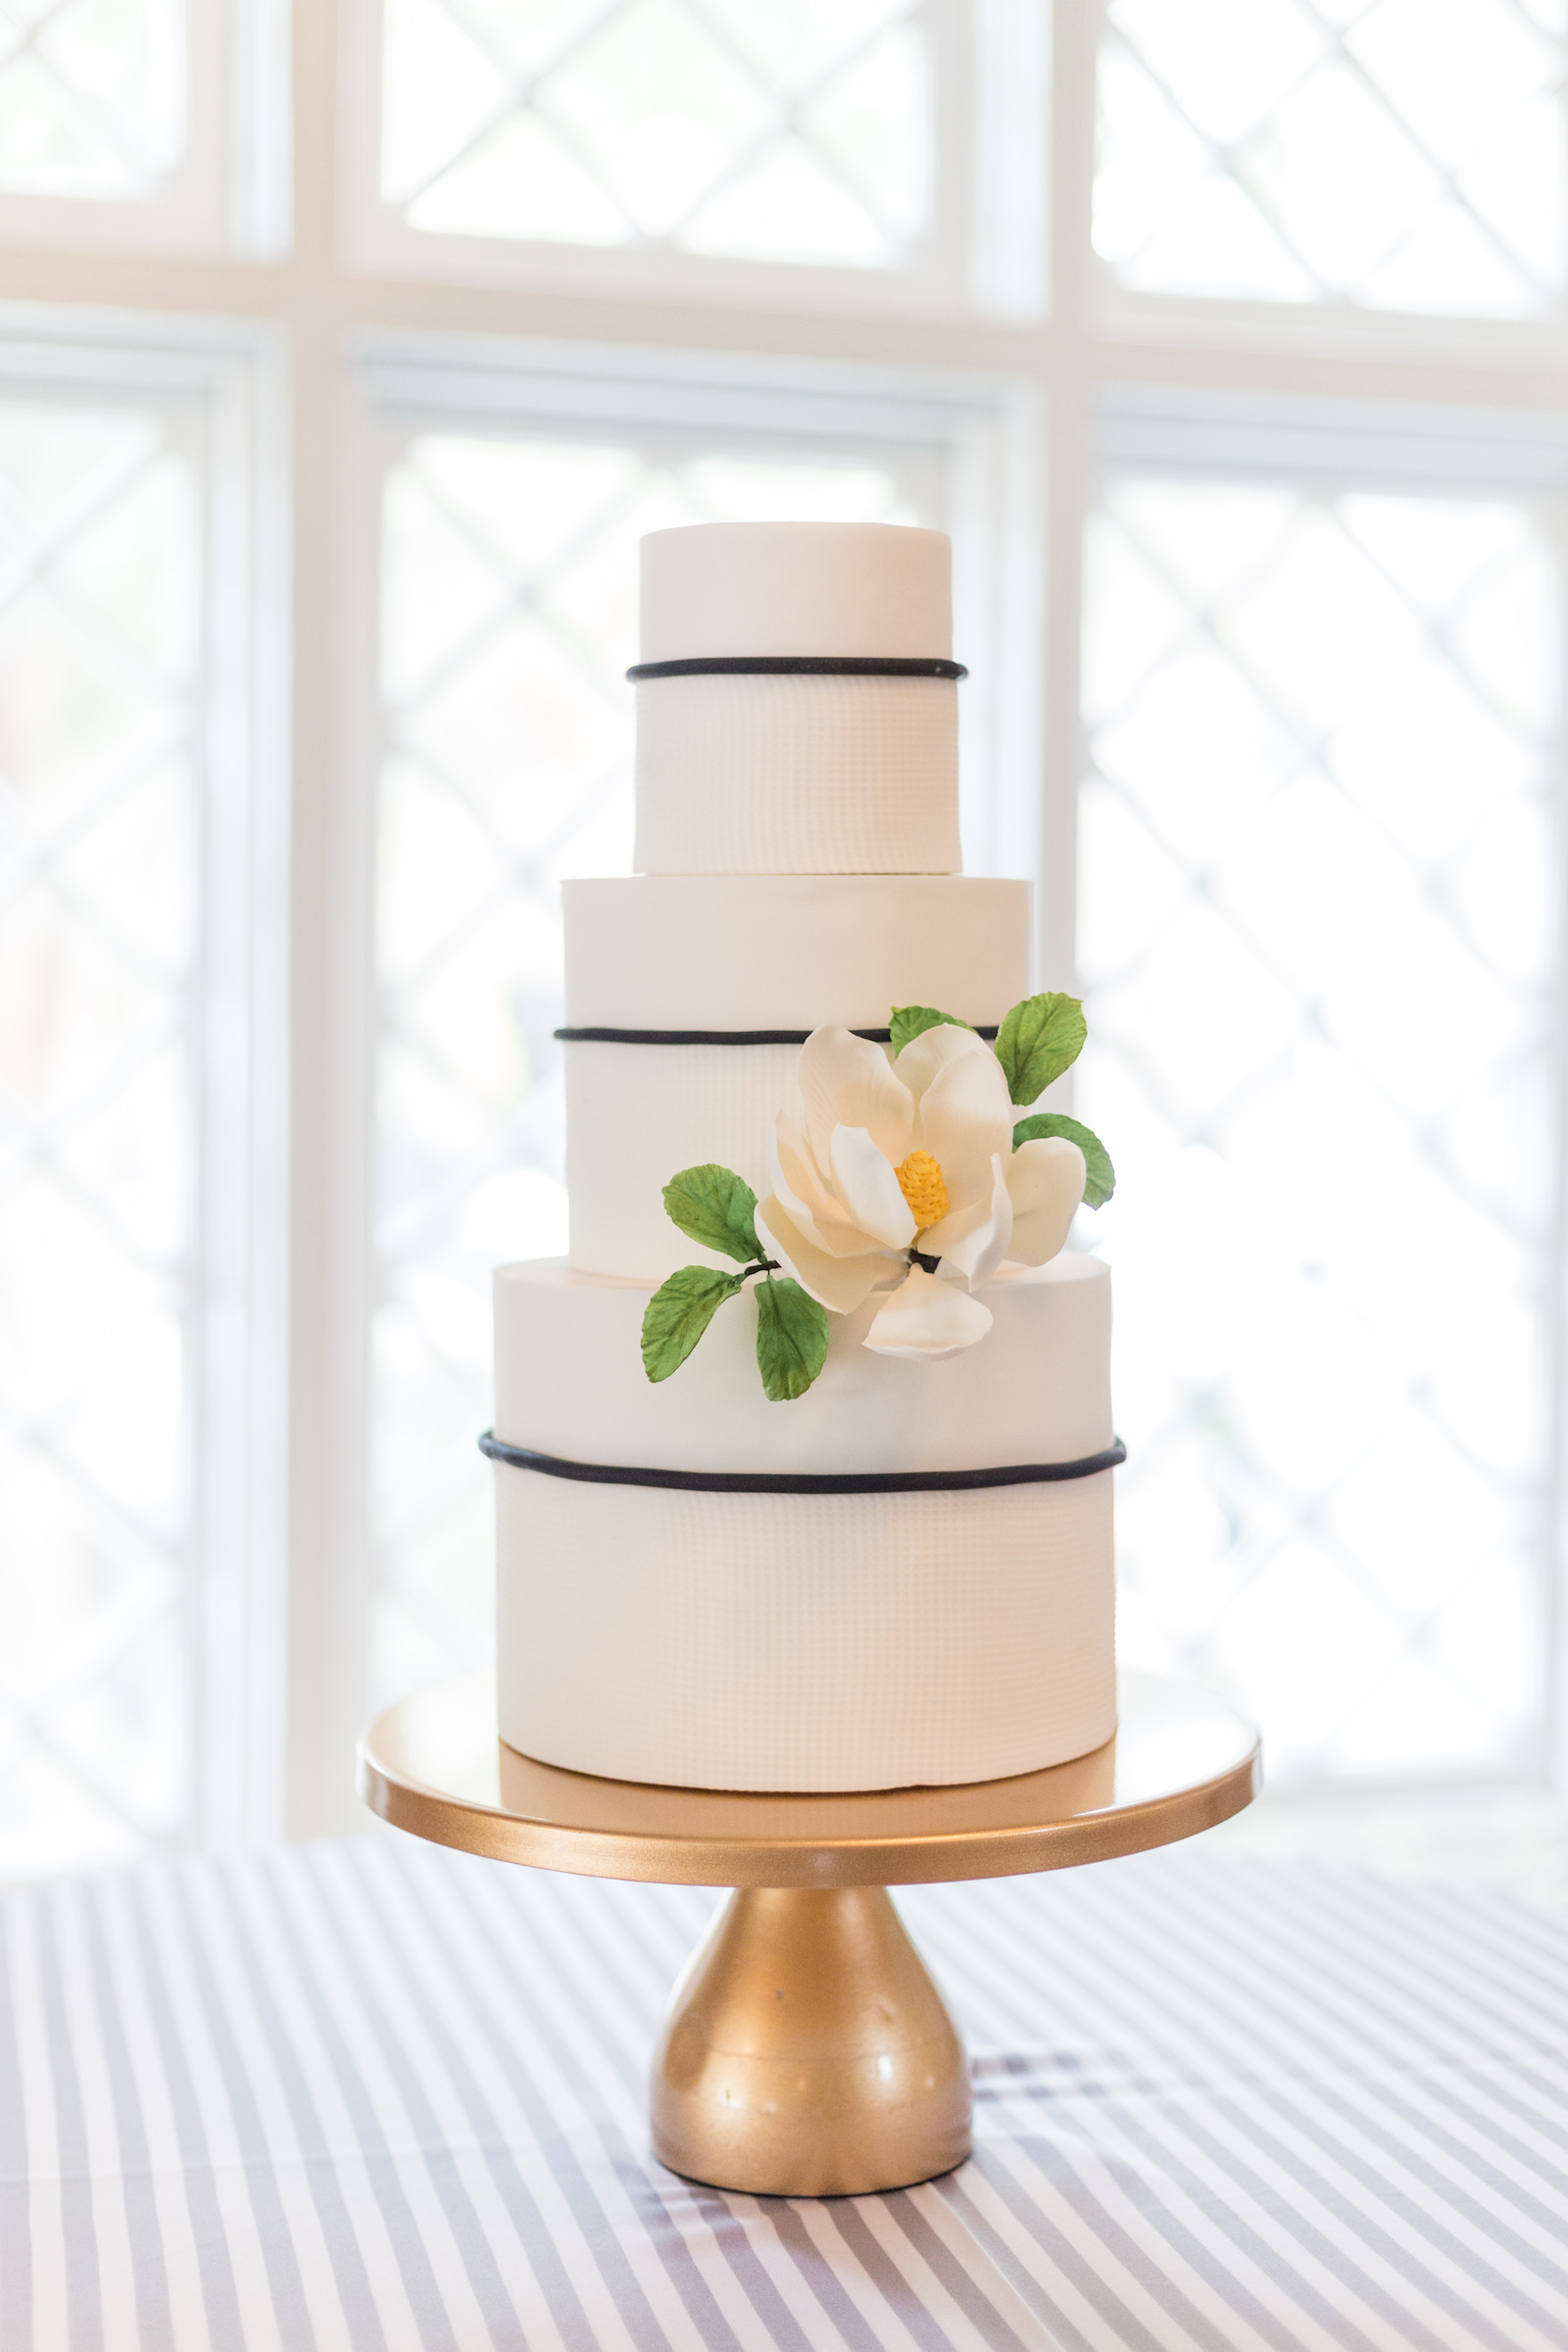 Classic three tier white and blue wedding cake with flower on table with blue striped tablecloth | Tampa Bay wedding planner Elegant Affairs by Design | Tampa Bay Cake Company